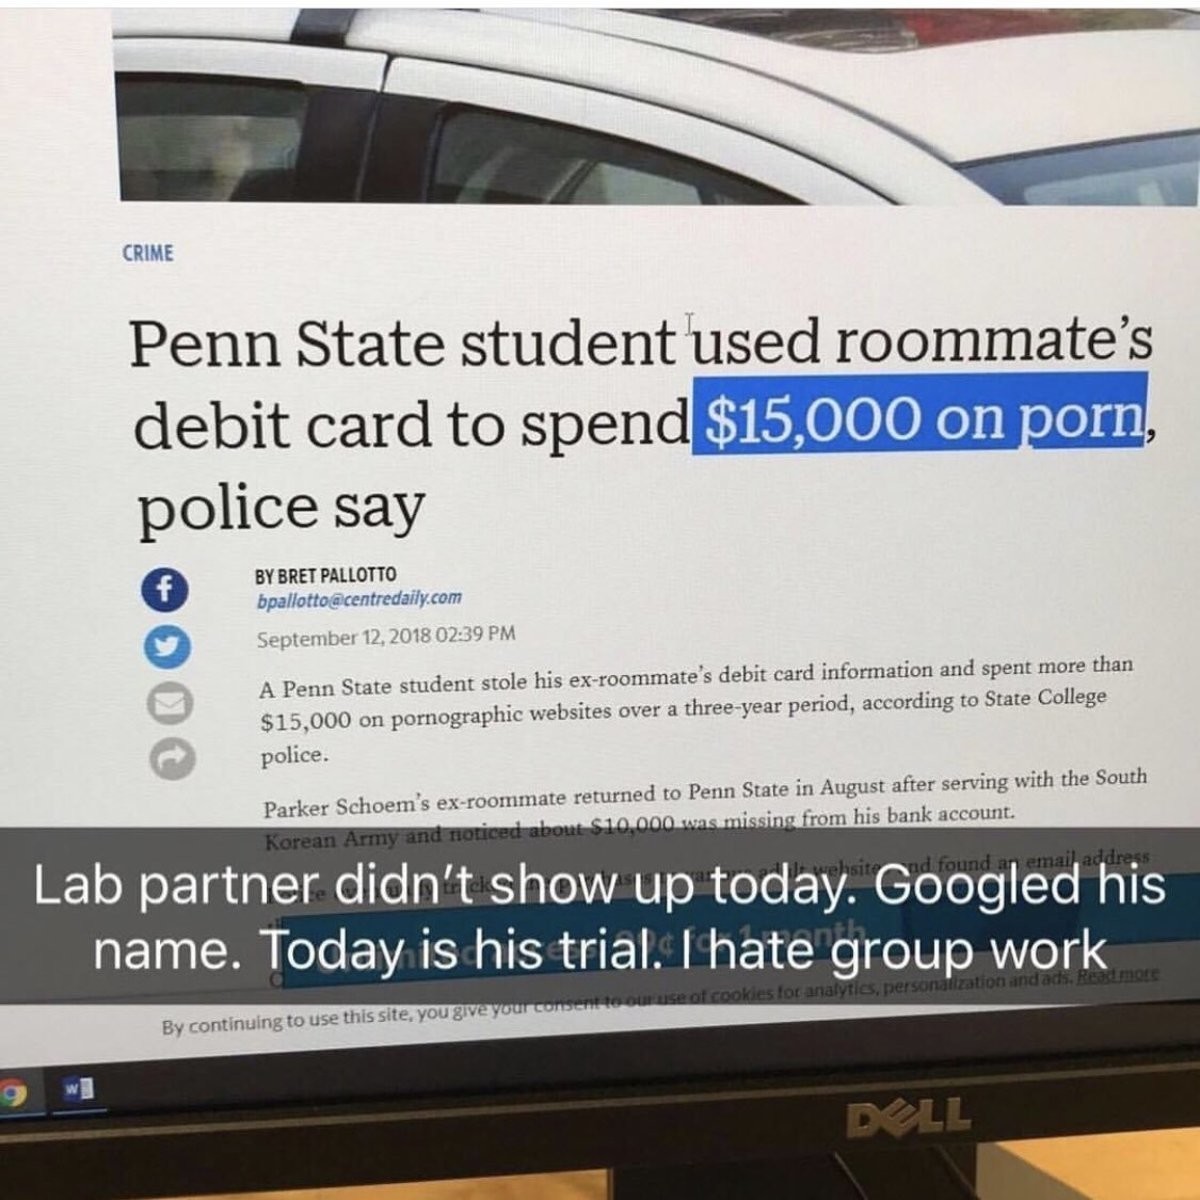 hate group projects reddit - Crime Penn State studentused roommate's debit card to spend $15,000 on porn, police say By Bret Pallotto bpallotto.com A Penn State student stole his exroommate's debit card information and spent more than $15,000 on pornograp